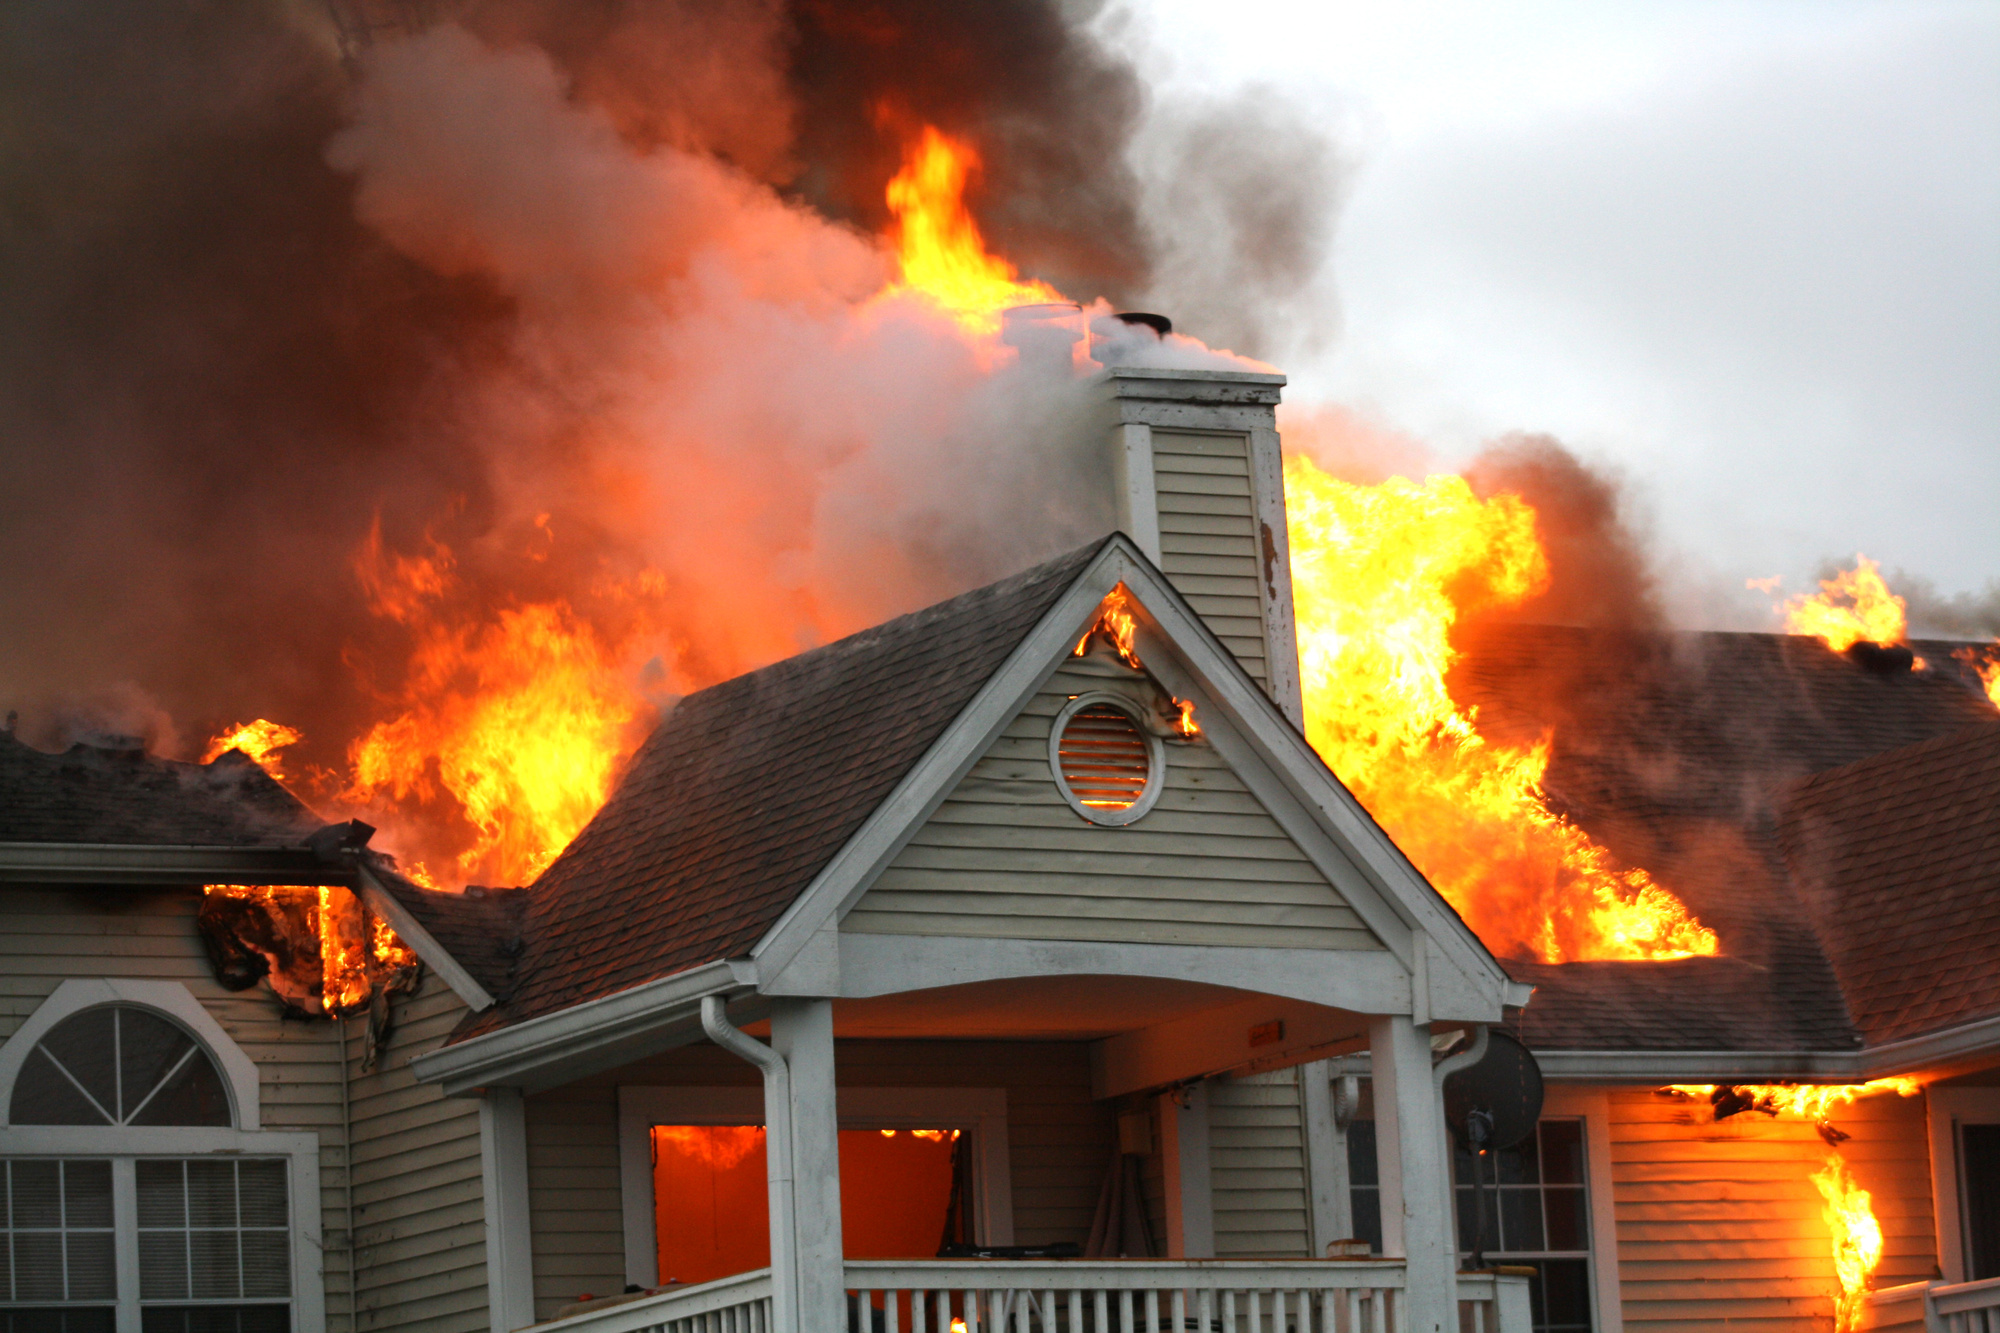 Fire Damage Restoration: A Step-by-Step Guide to the Fire Damage Cleanup Process